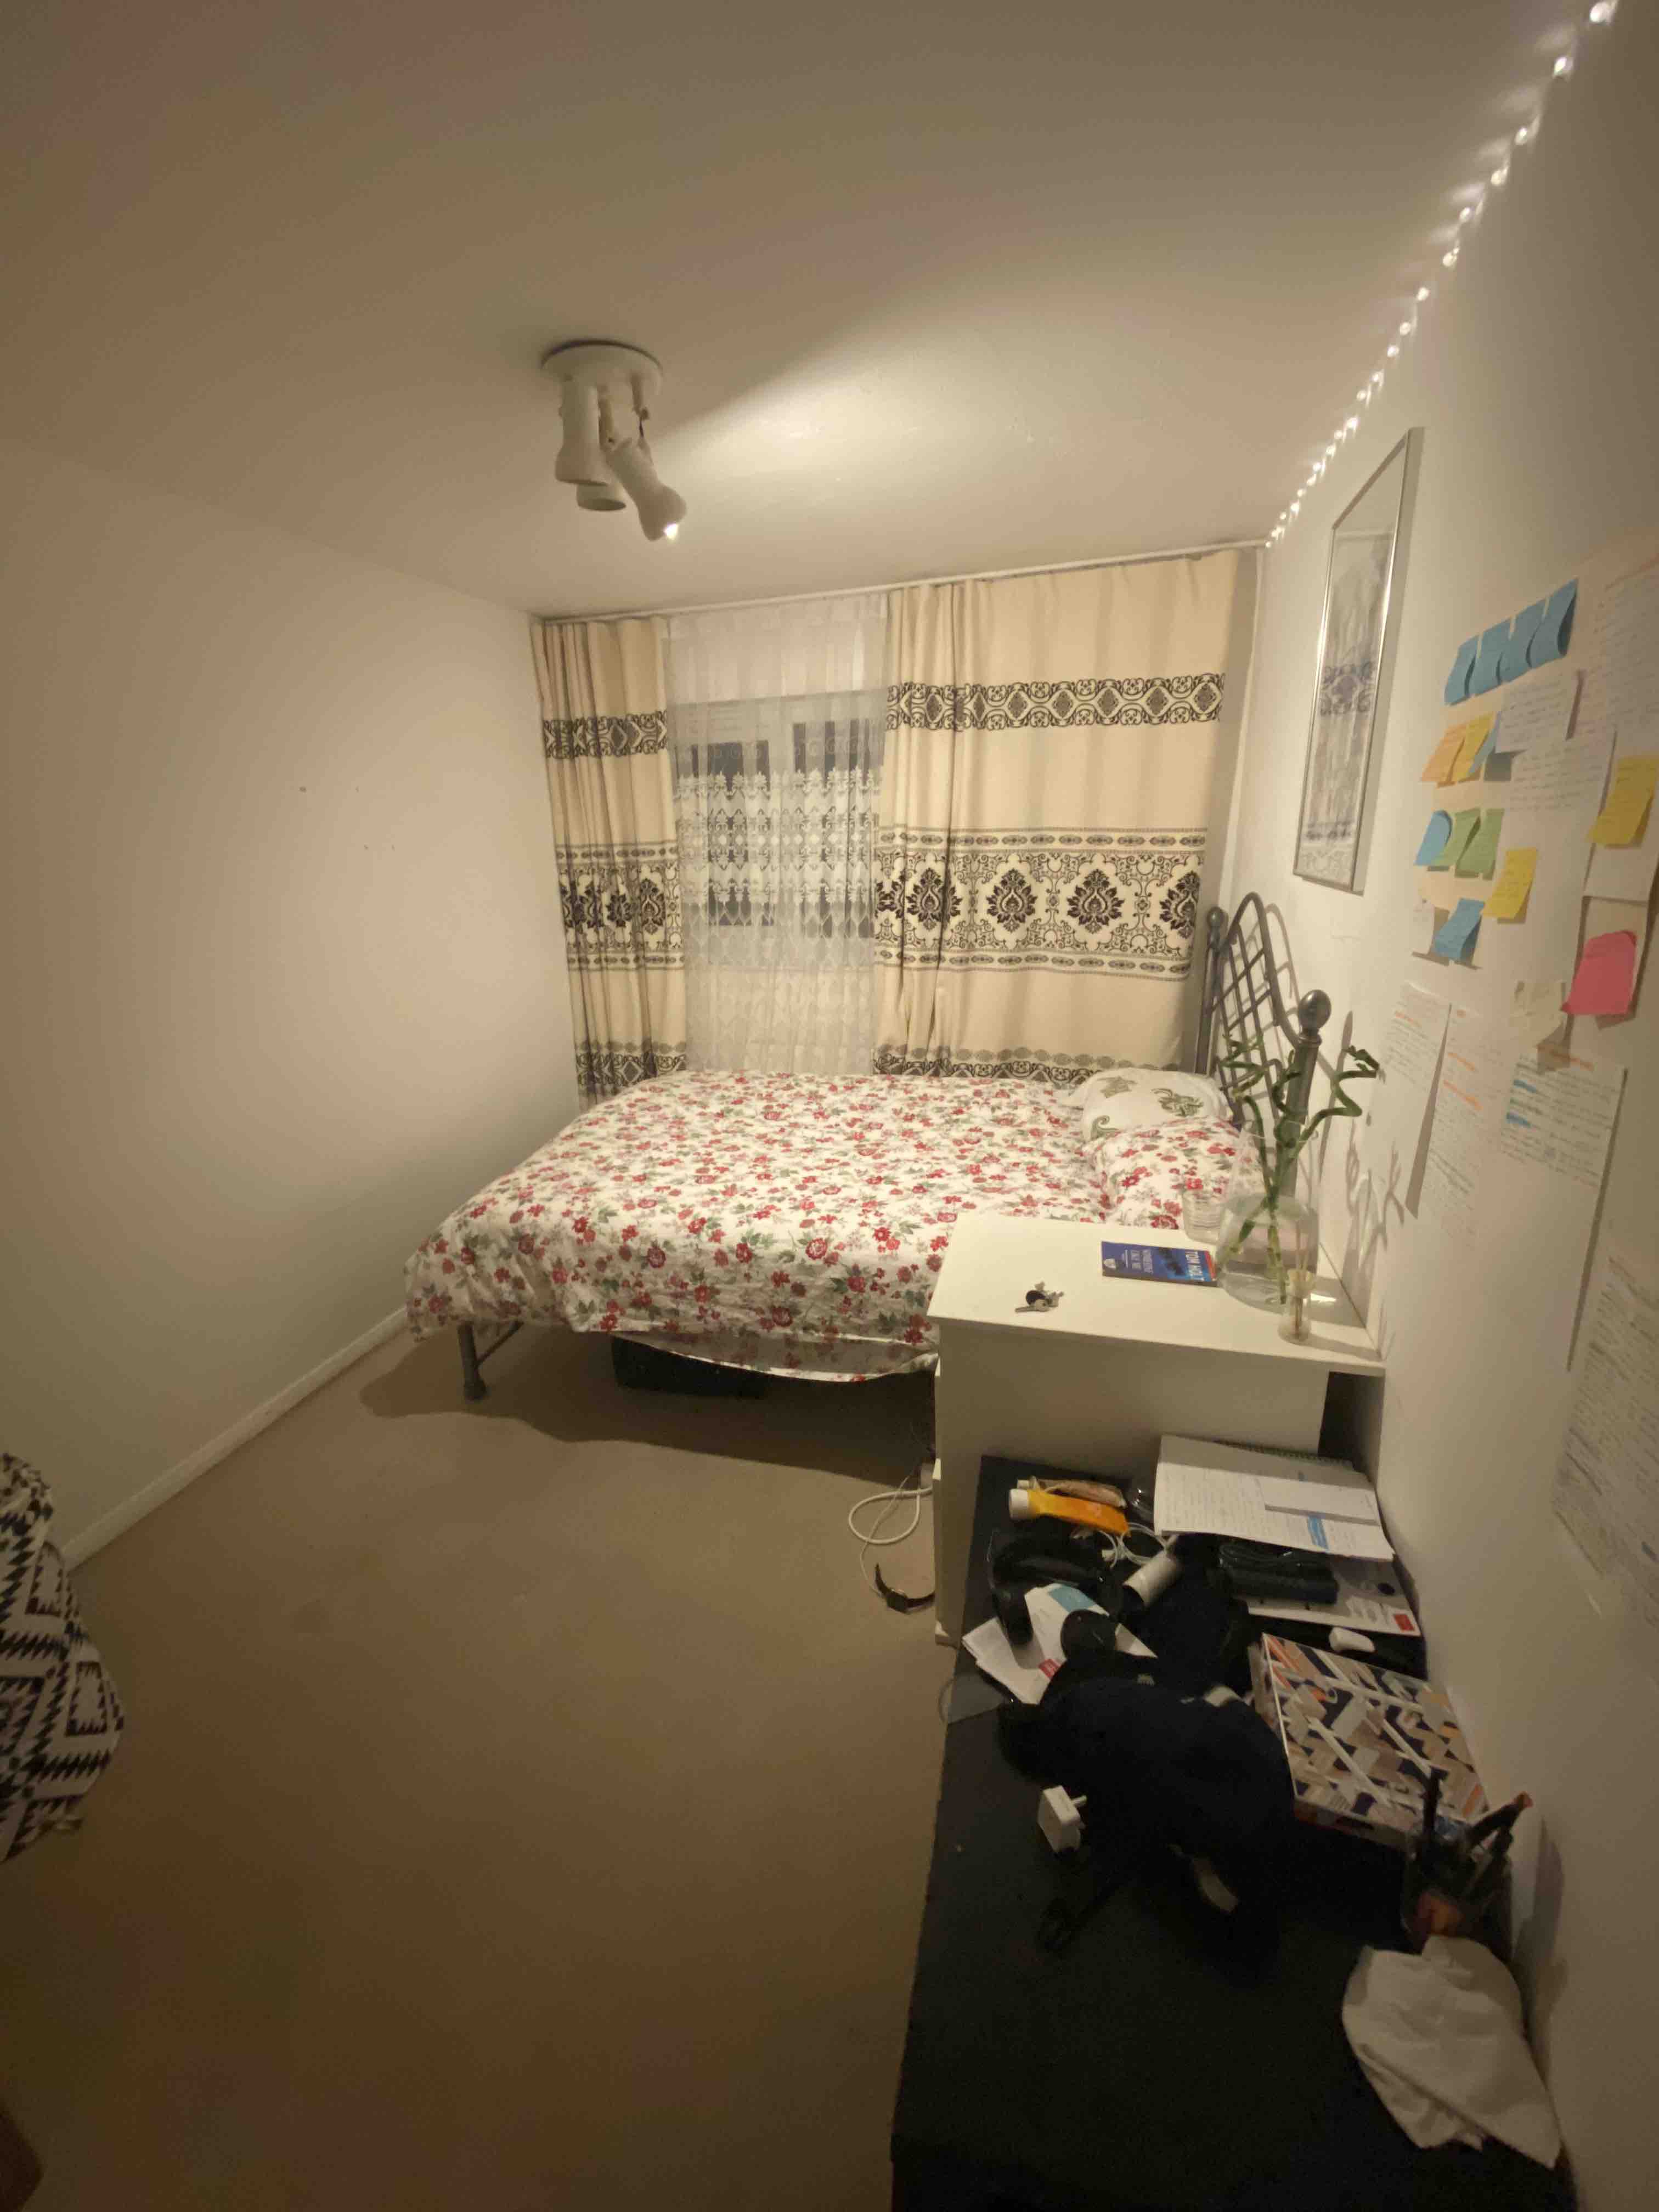  RoomsLocal image